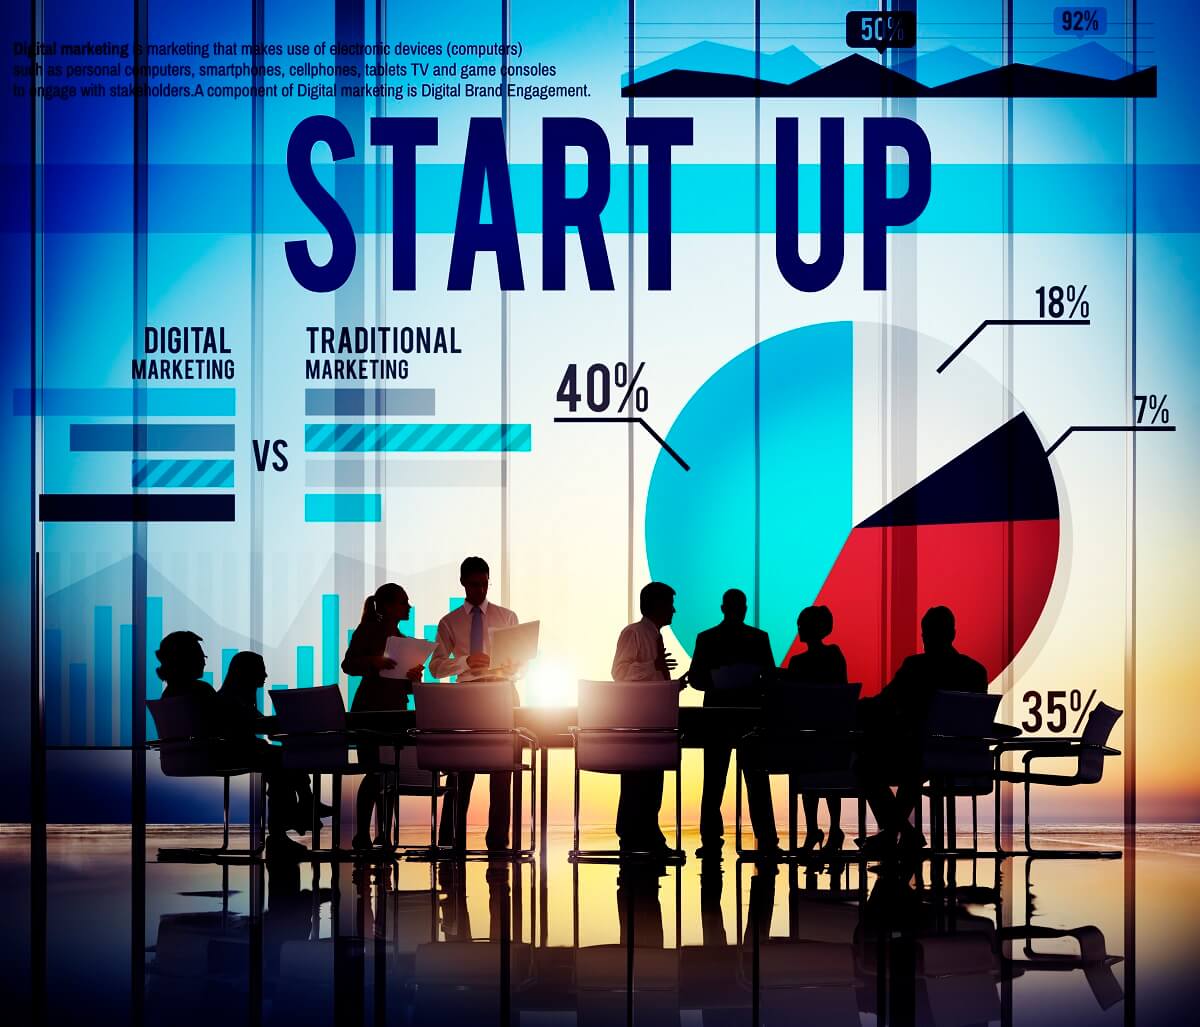 empowering-startups-the-soaring-impact-of-digital-india